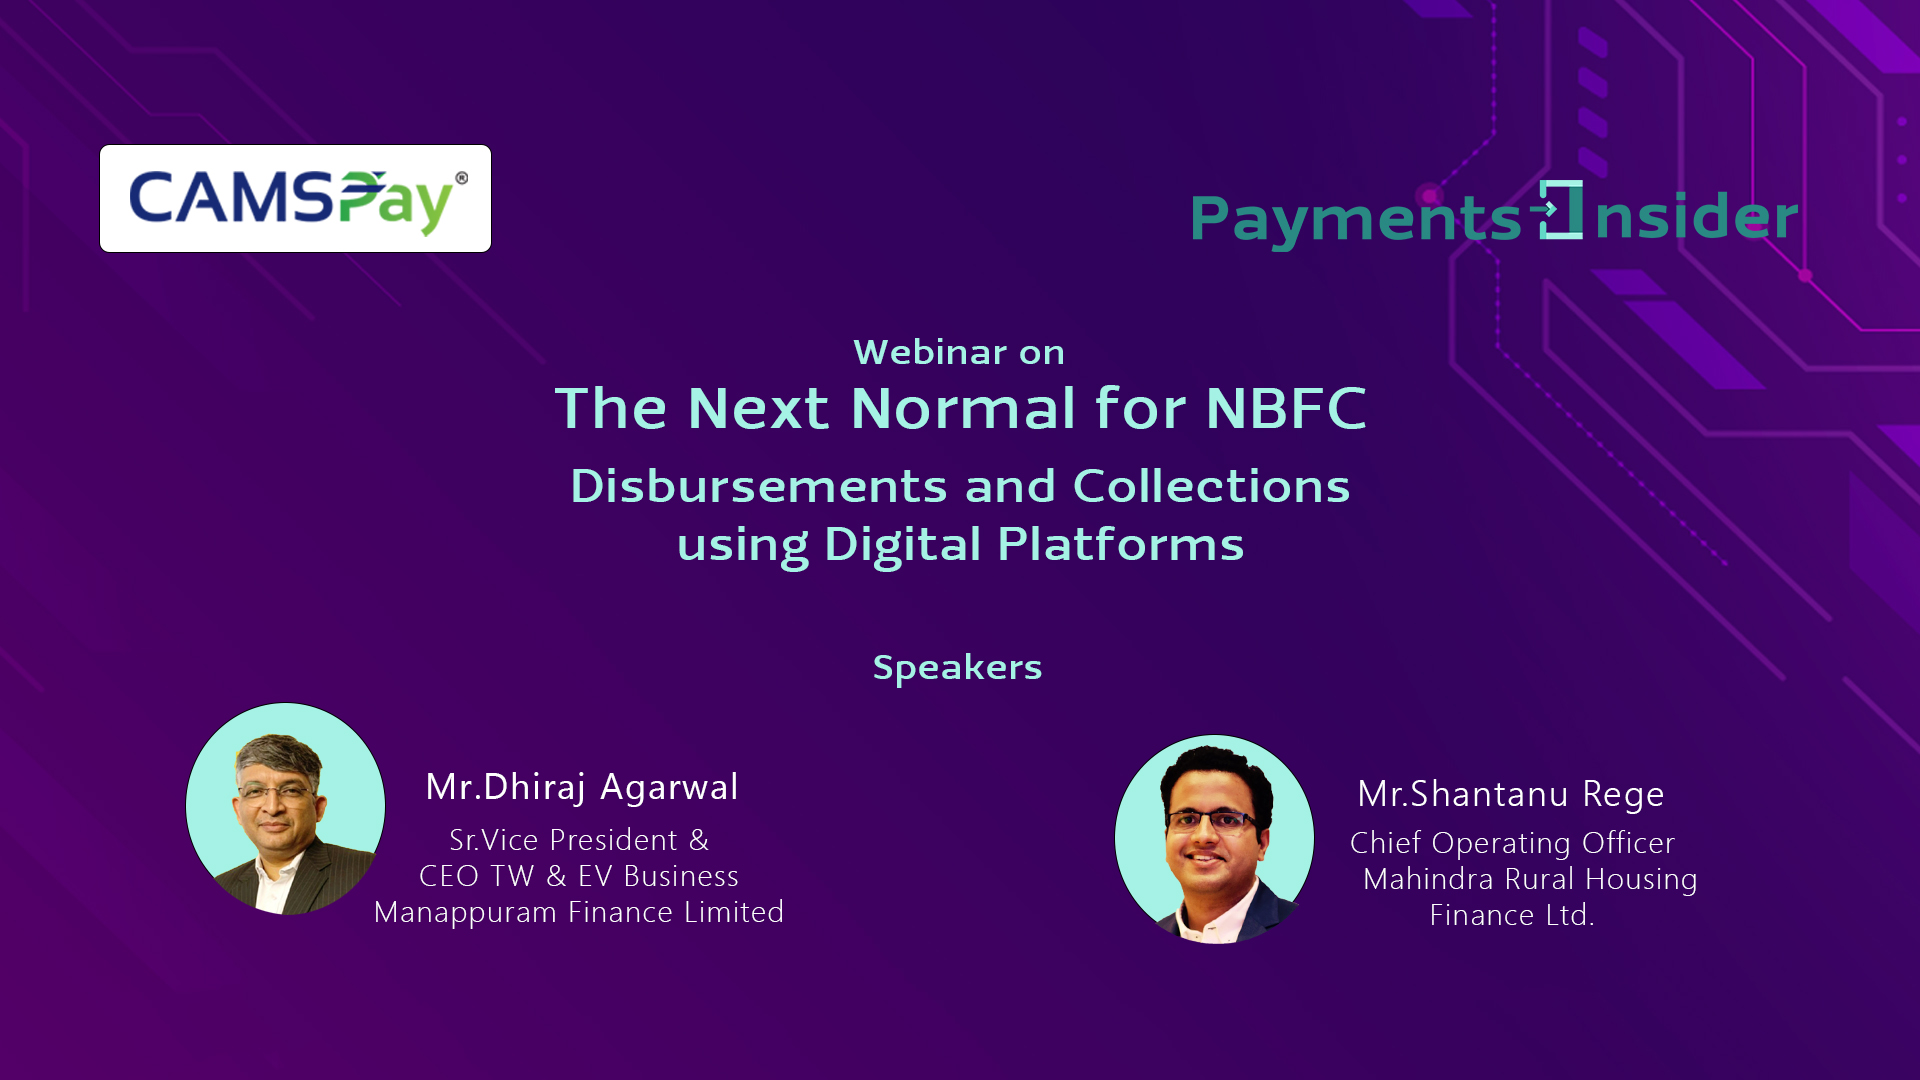 The New Normal for NBFC – Disbursements & Collections using Digital Payments